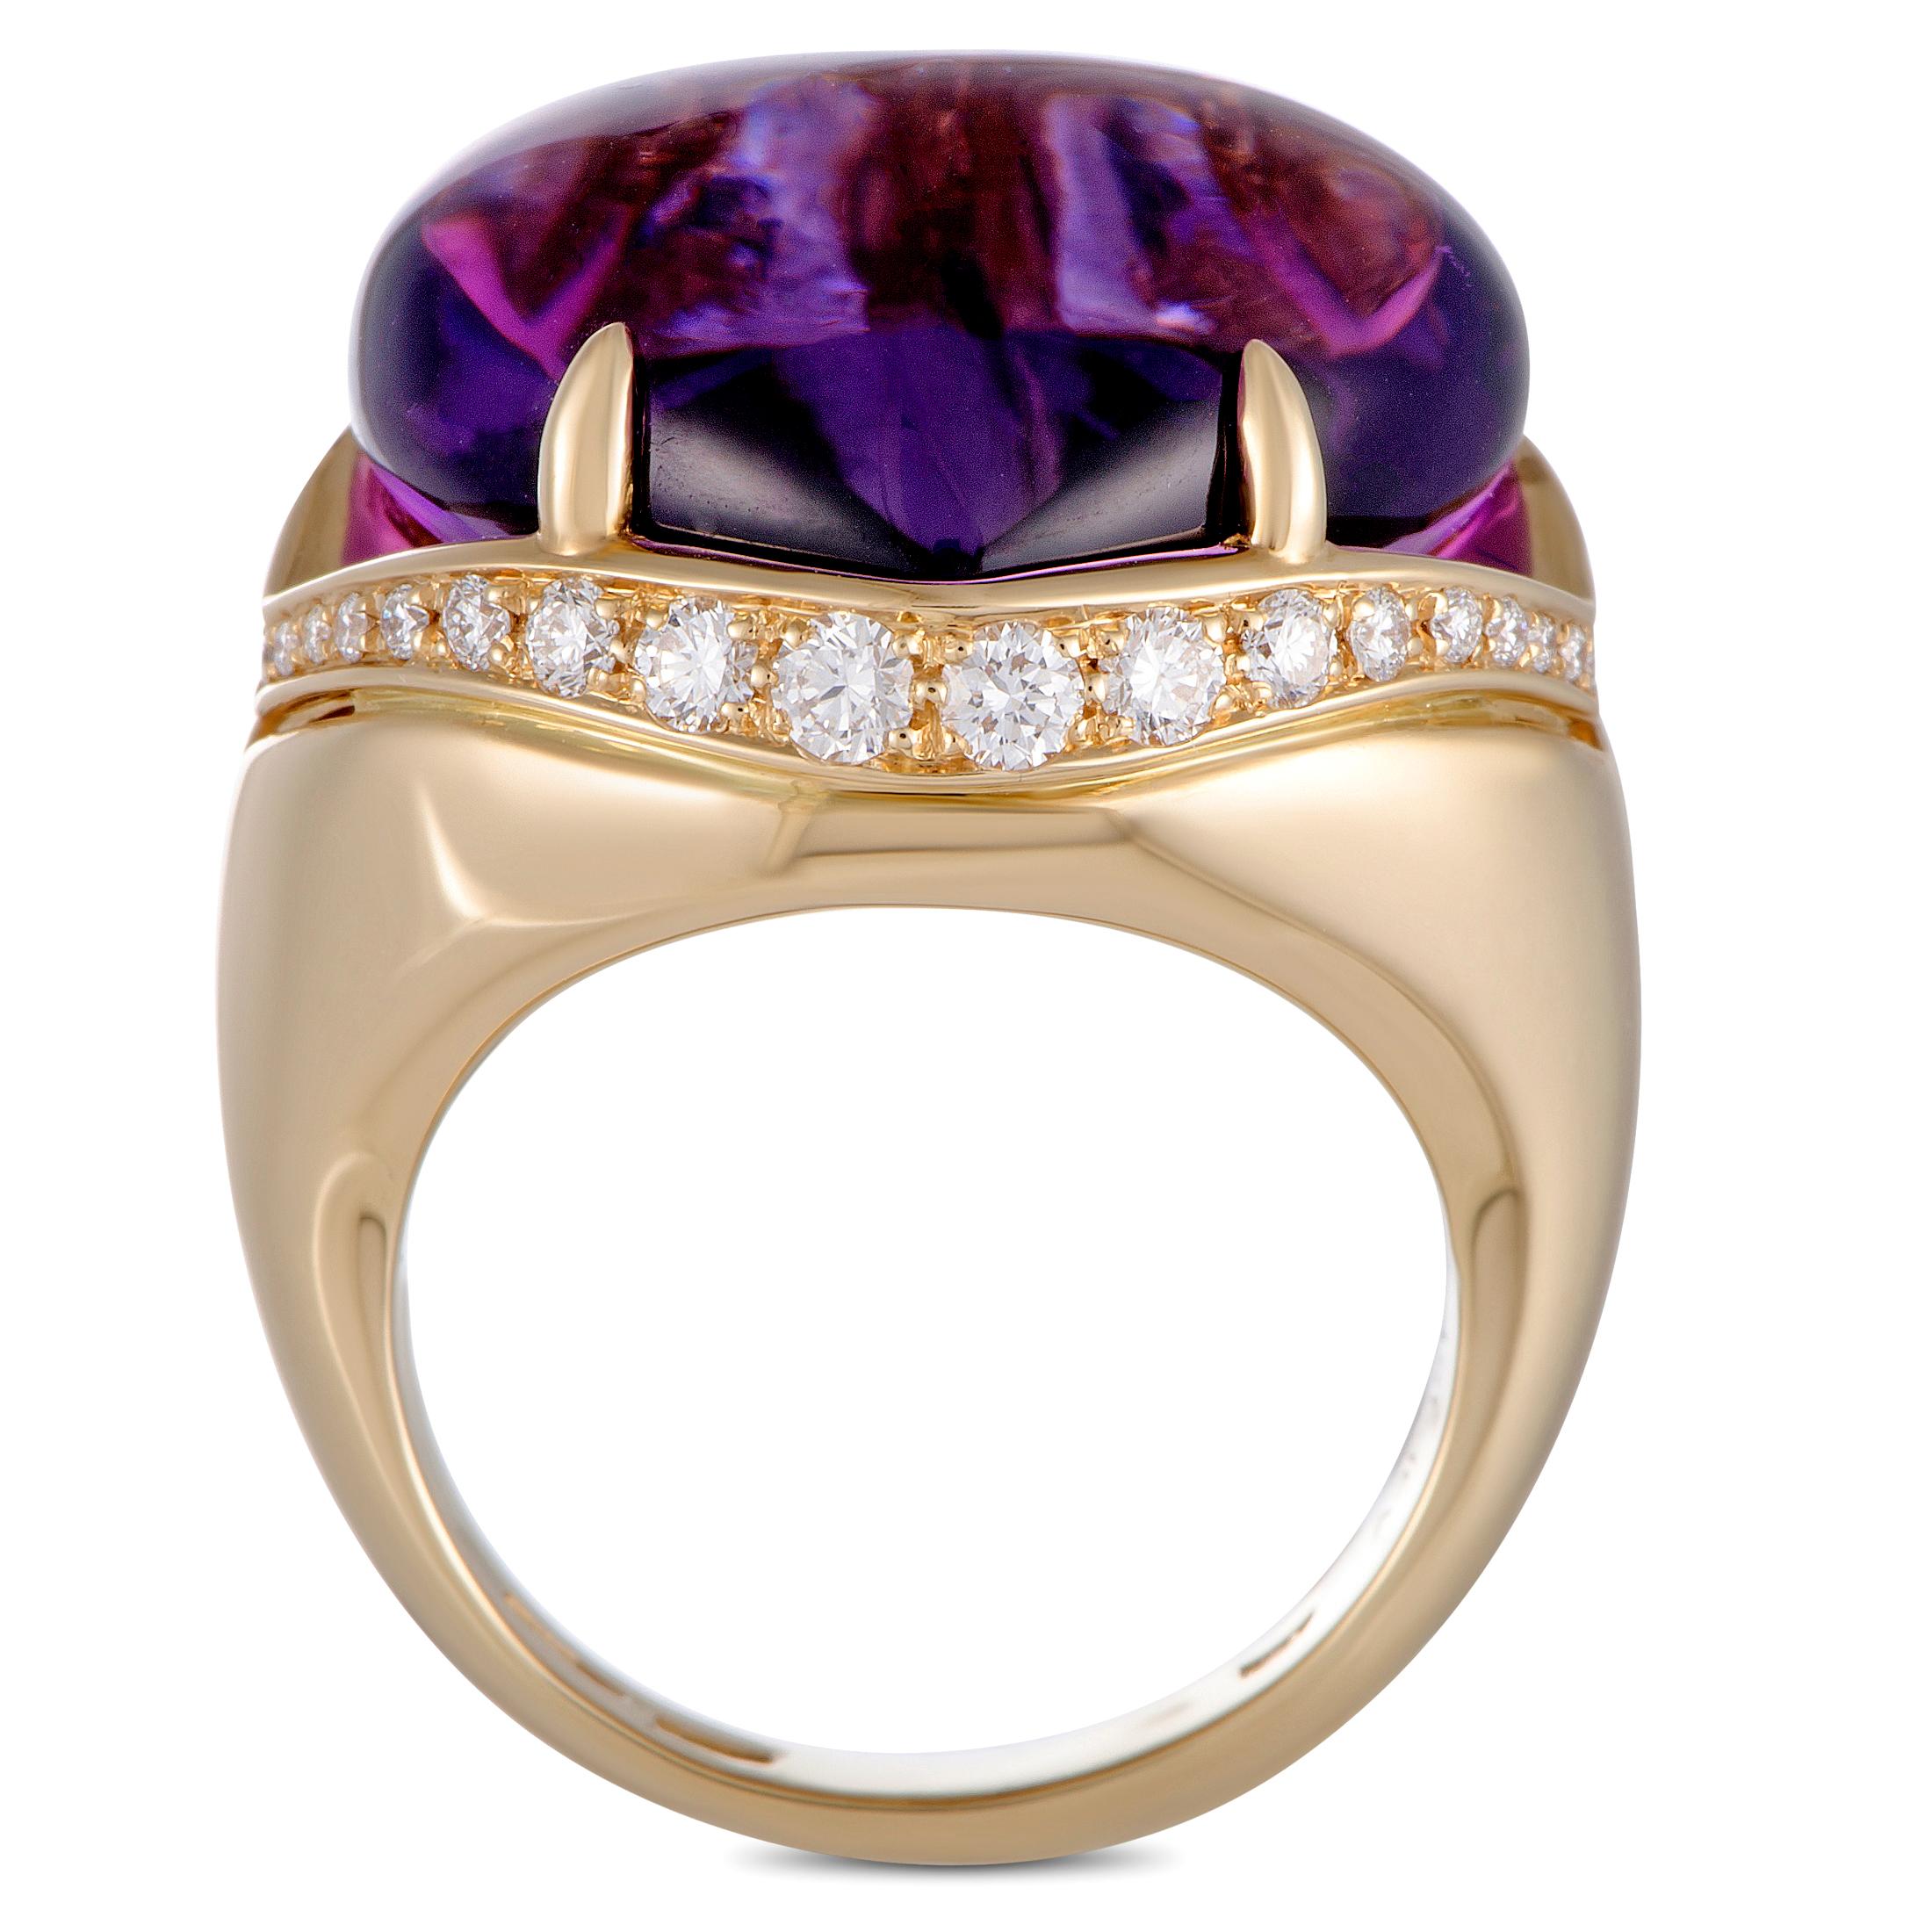 The Bvlgari “Sassi” ring is crafted from 18K yellow gold and weighs 14 grams, featuring band thickness of 3 mm and top height of 12 mm, while top dimensions measure 17 by 20 mm. The ring is set with an amethyst and a total of 0.66 carats of diamonds